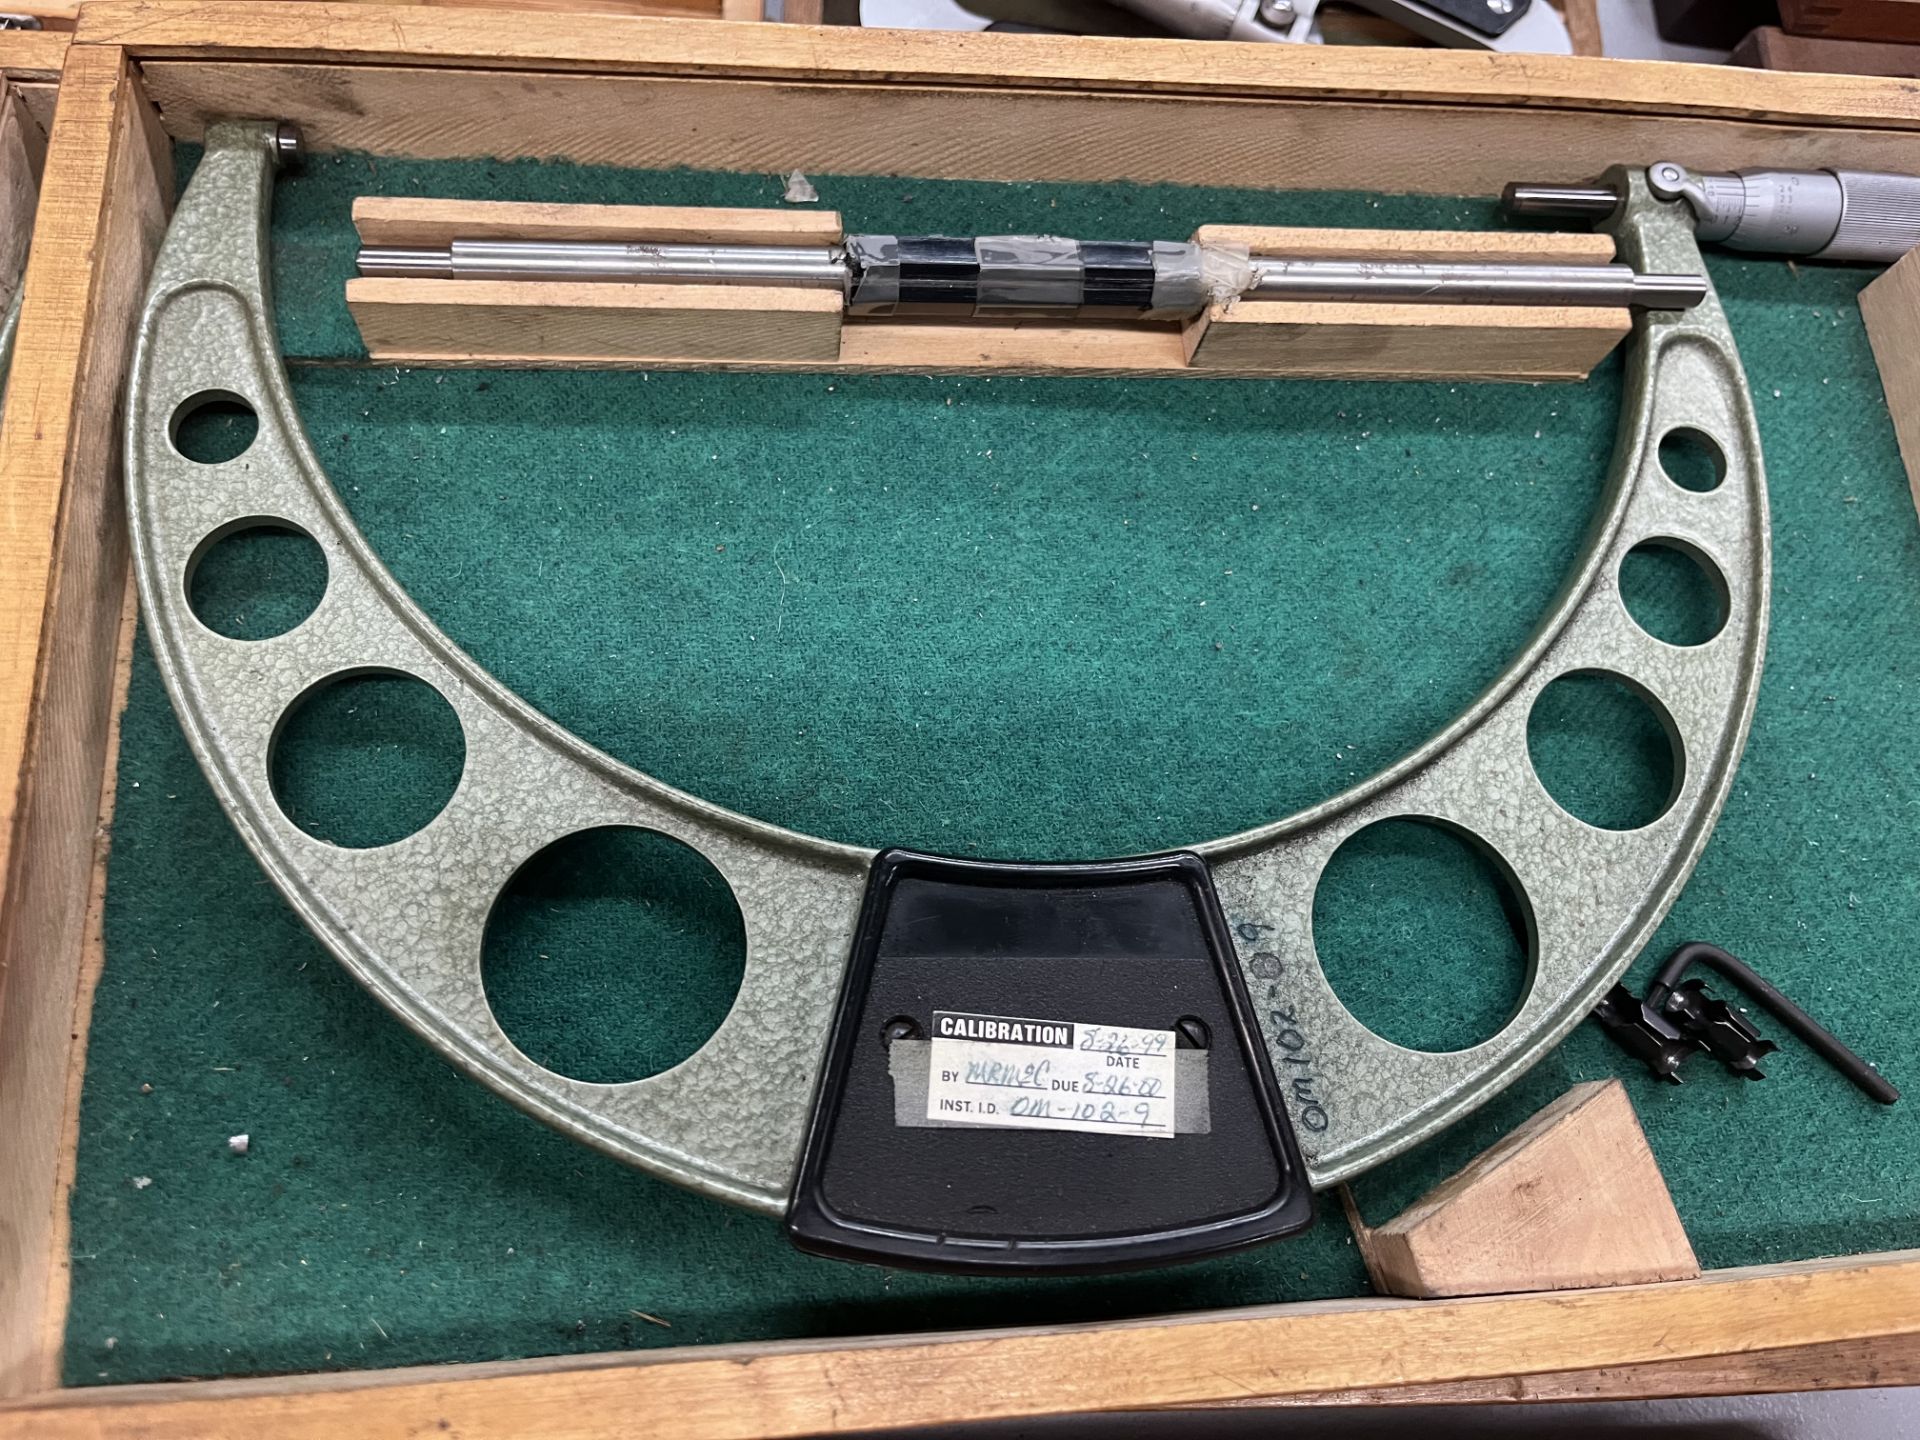 (9) OD Micrometer - (2) 4" to 5", (1) 5" to 6", (1) 6" to 7", (1) 7" to 8", (1) 8" to 9, (1) 9" t - Image 7 of 9